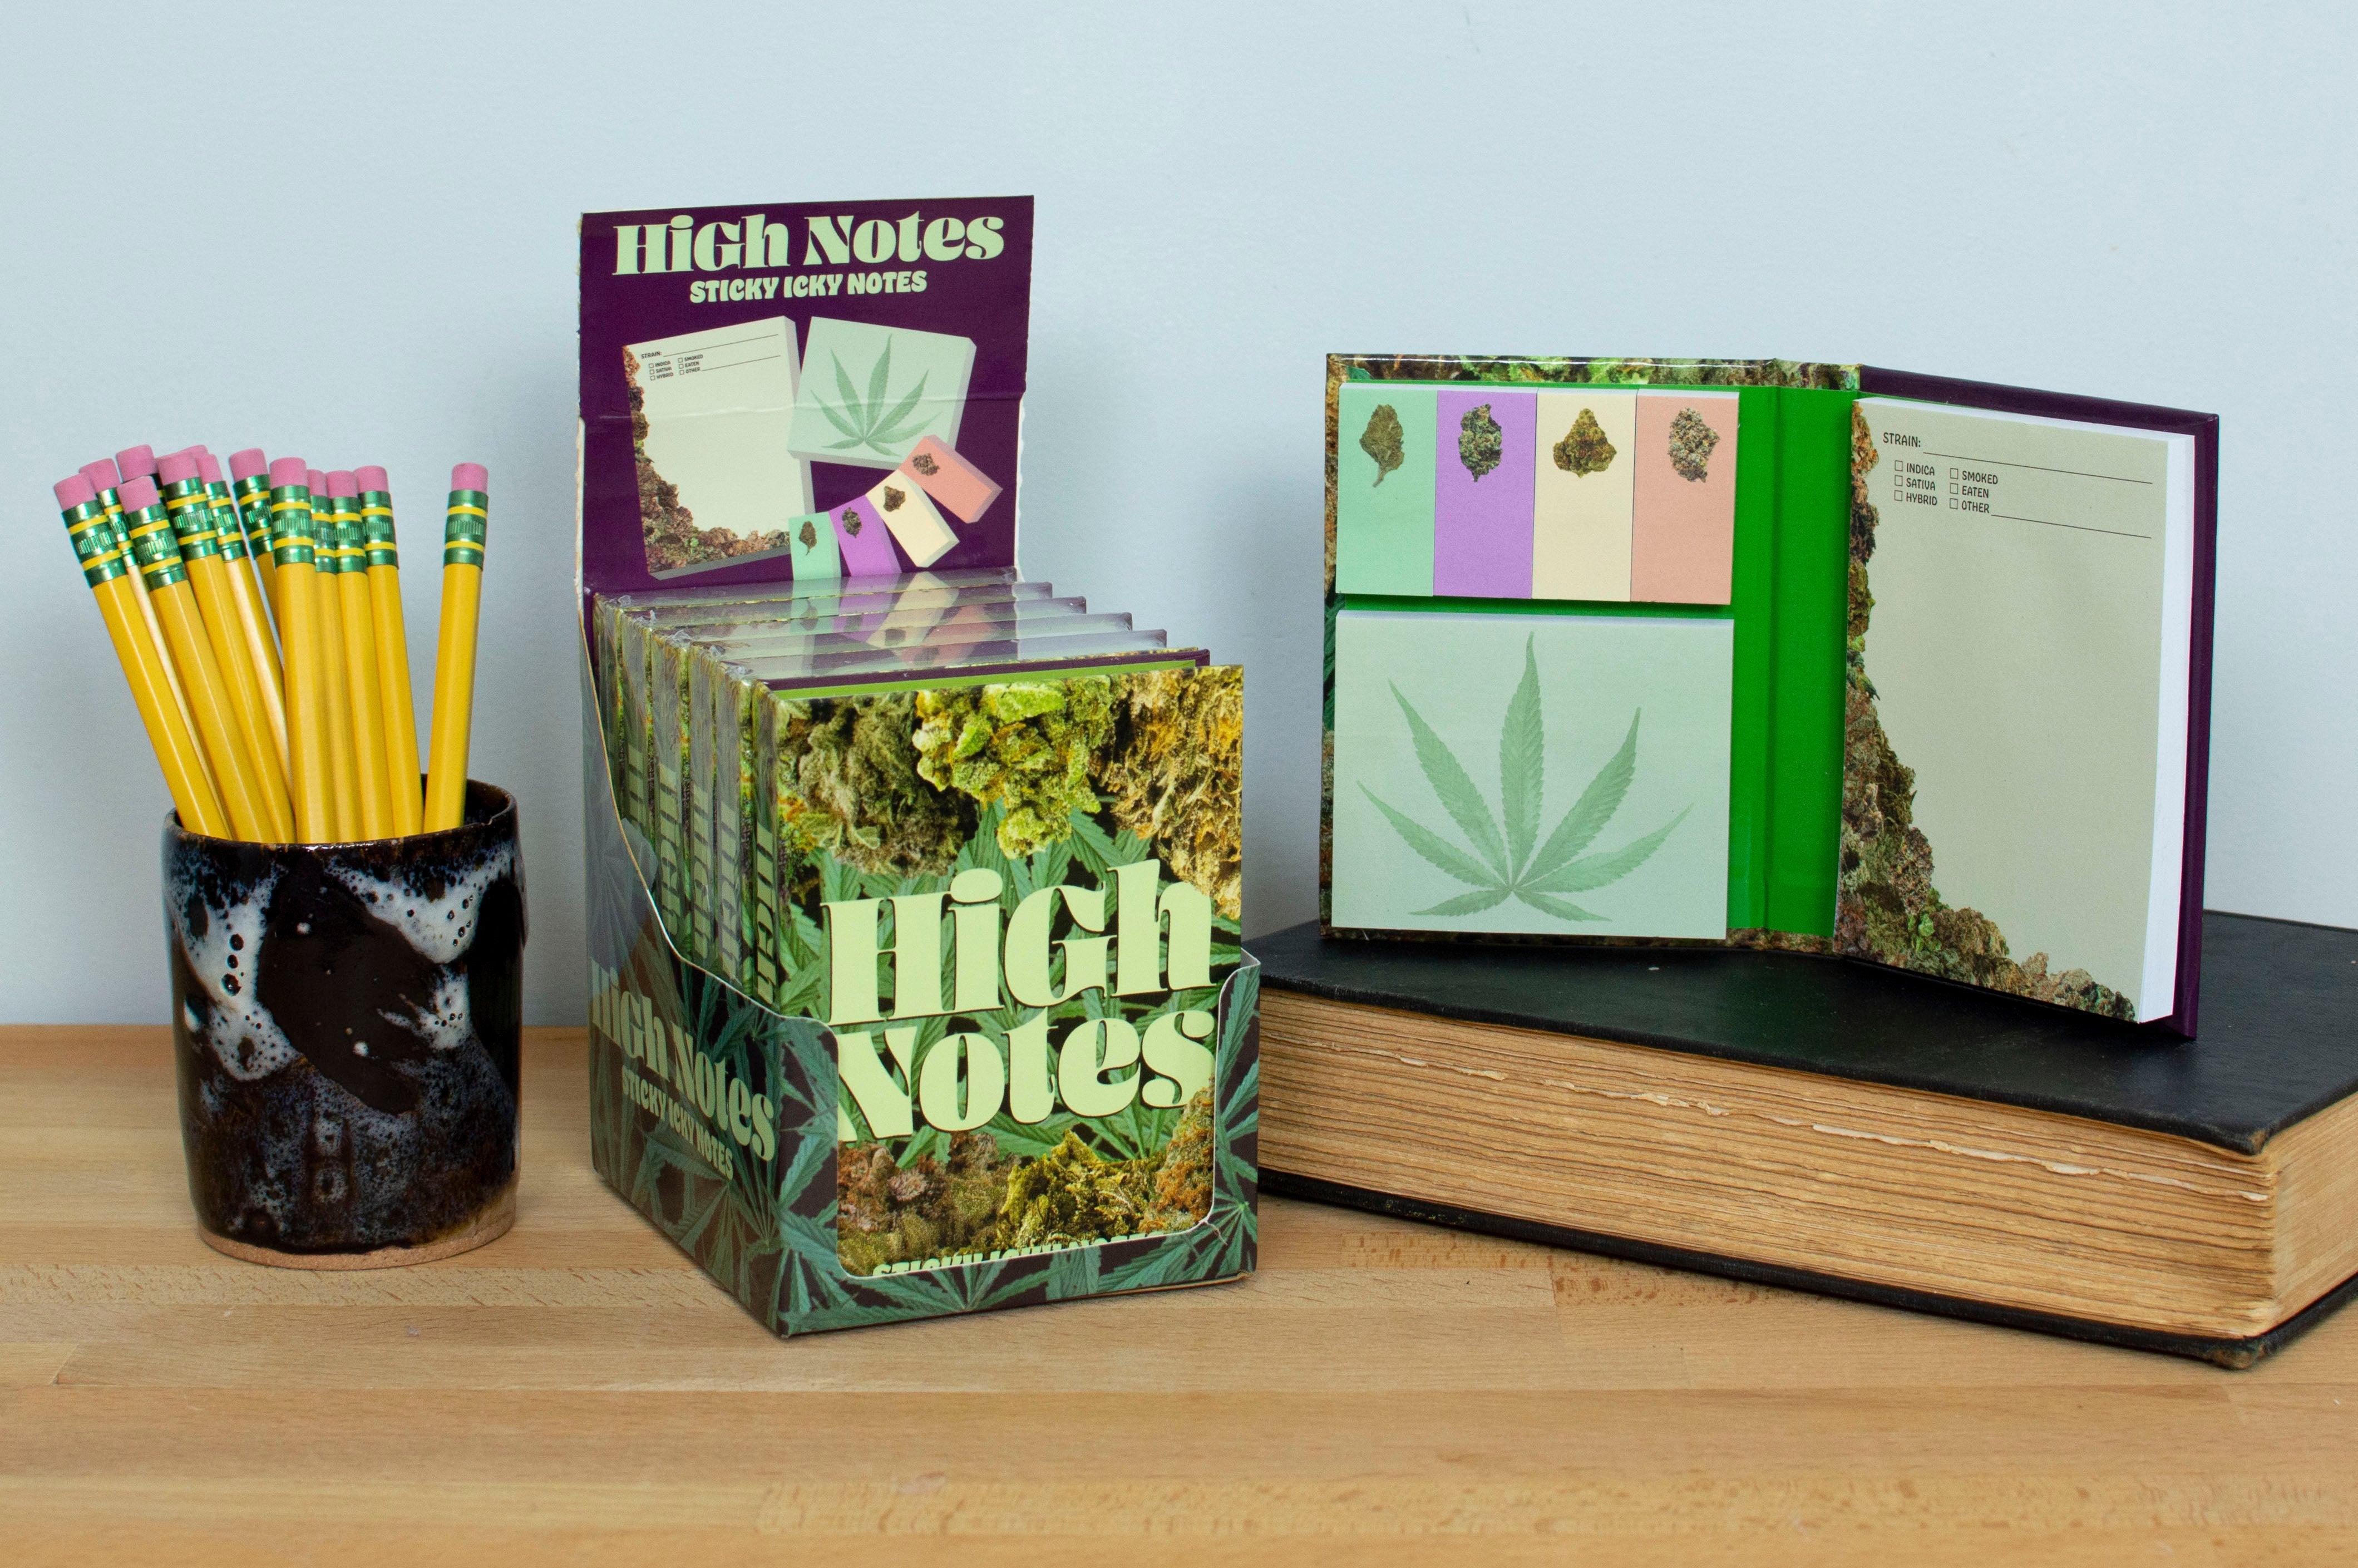 Product photo of High Notes Sticky Notes, a novelty gift manufactured by The Unemployed Philosophers Guild.